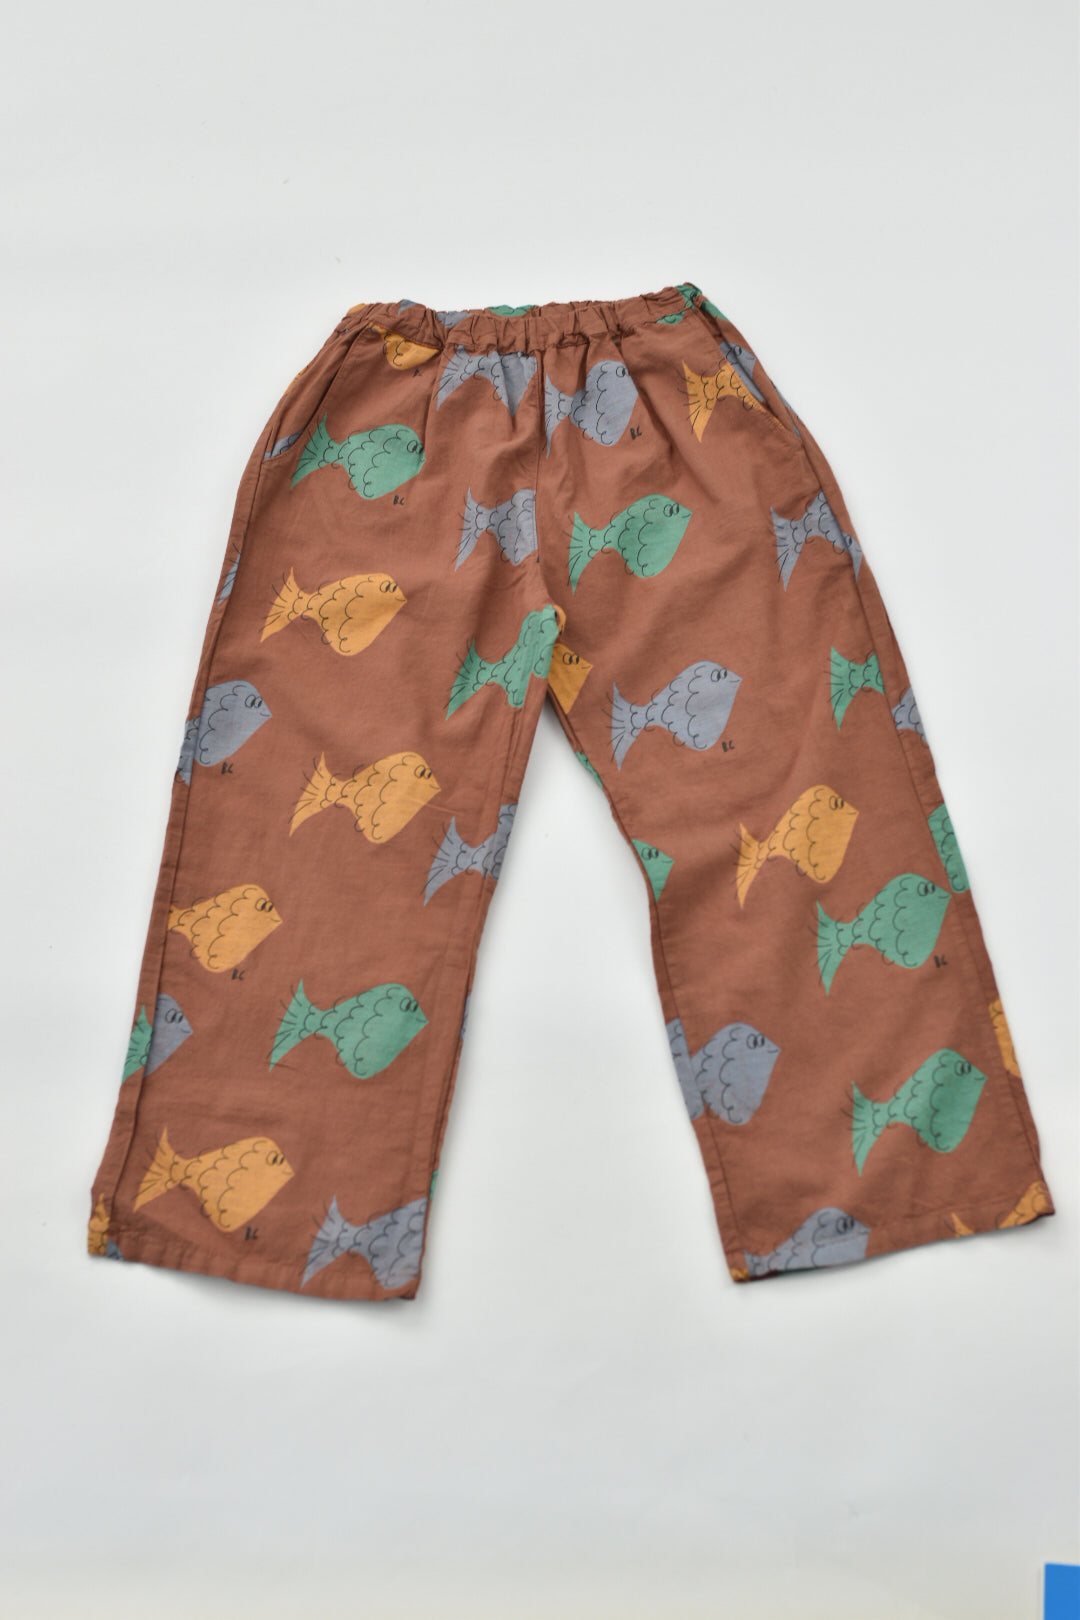 RE LOVED Bobo Choses summer pant size 6-7